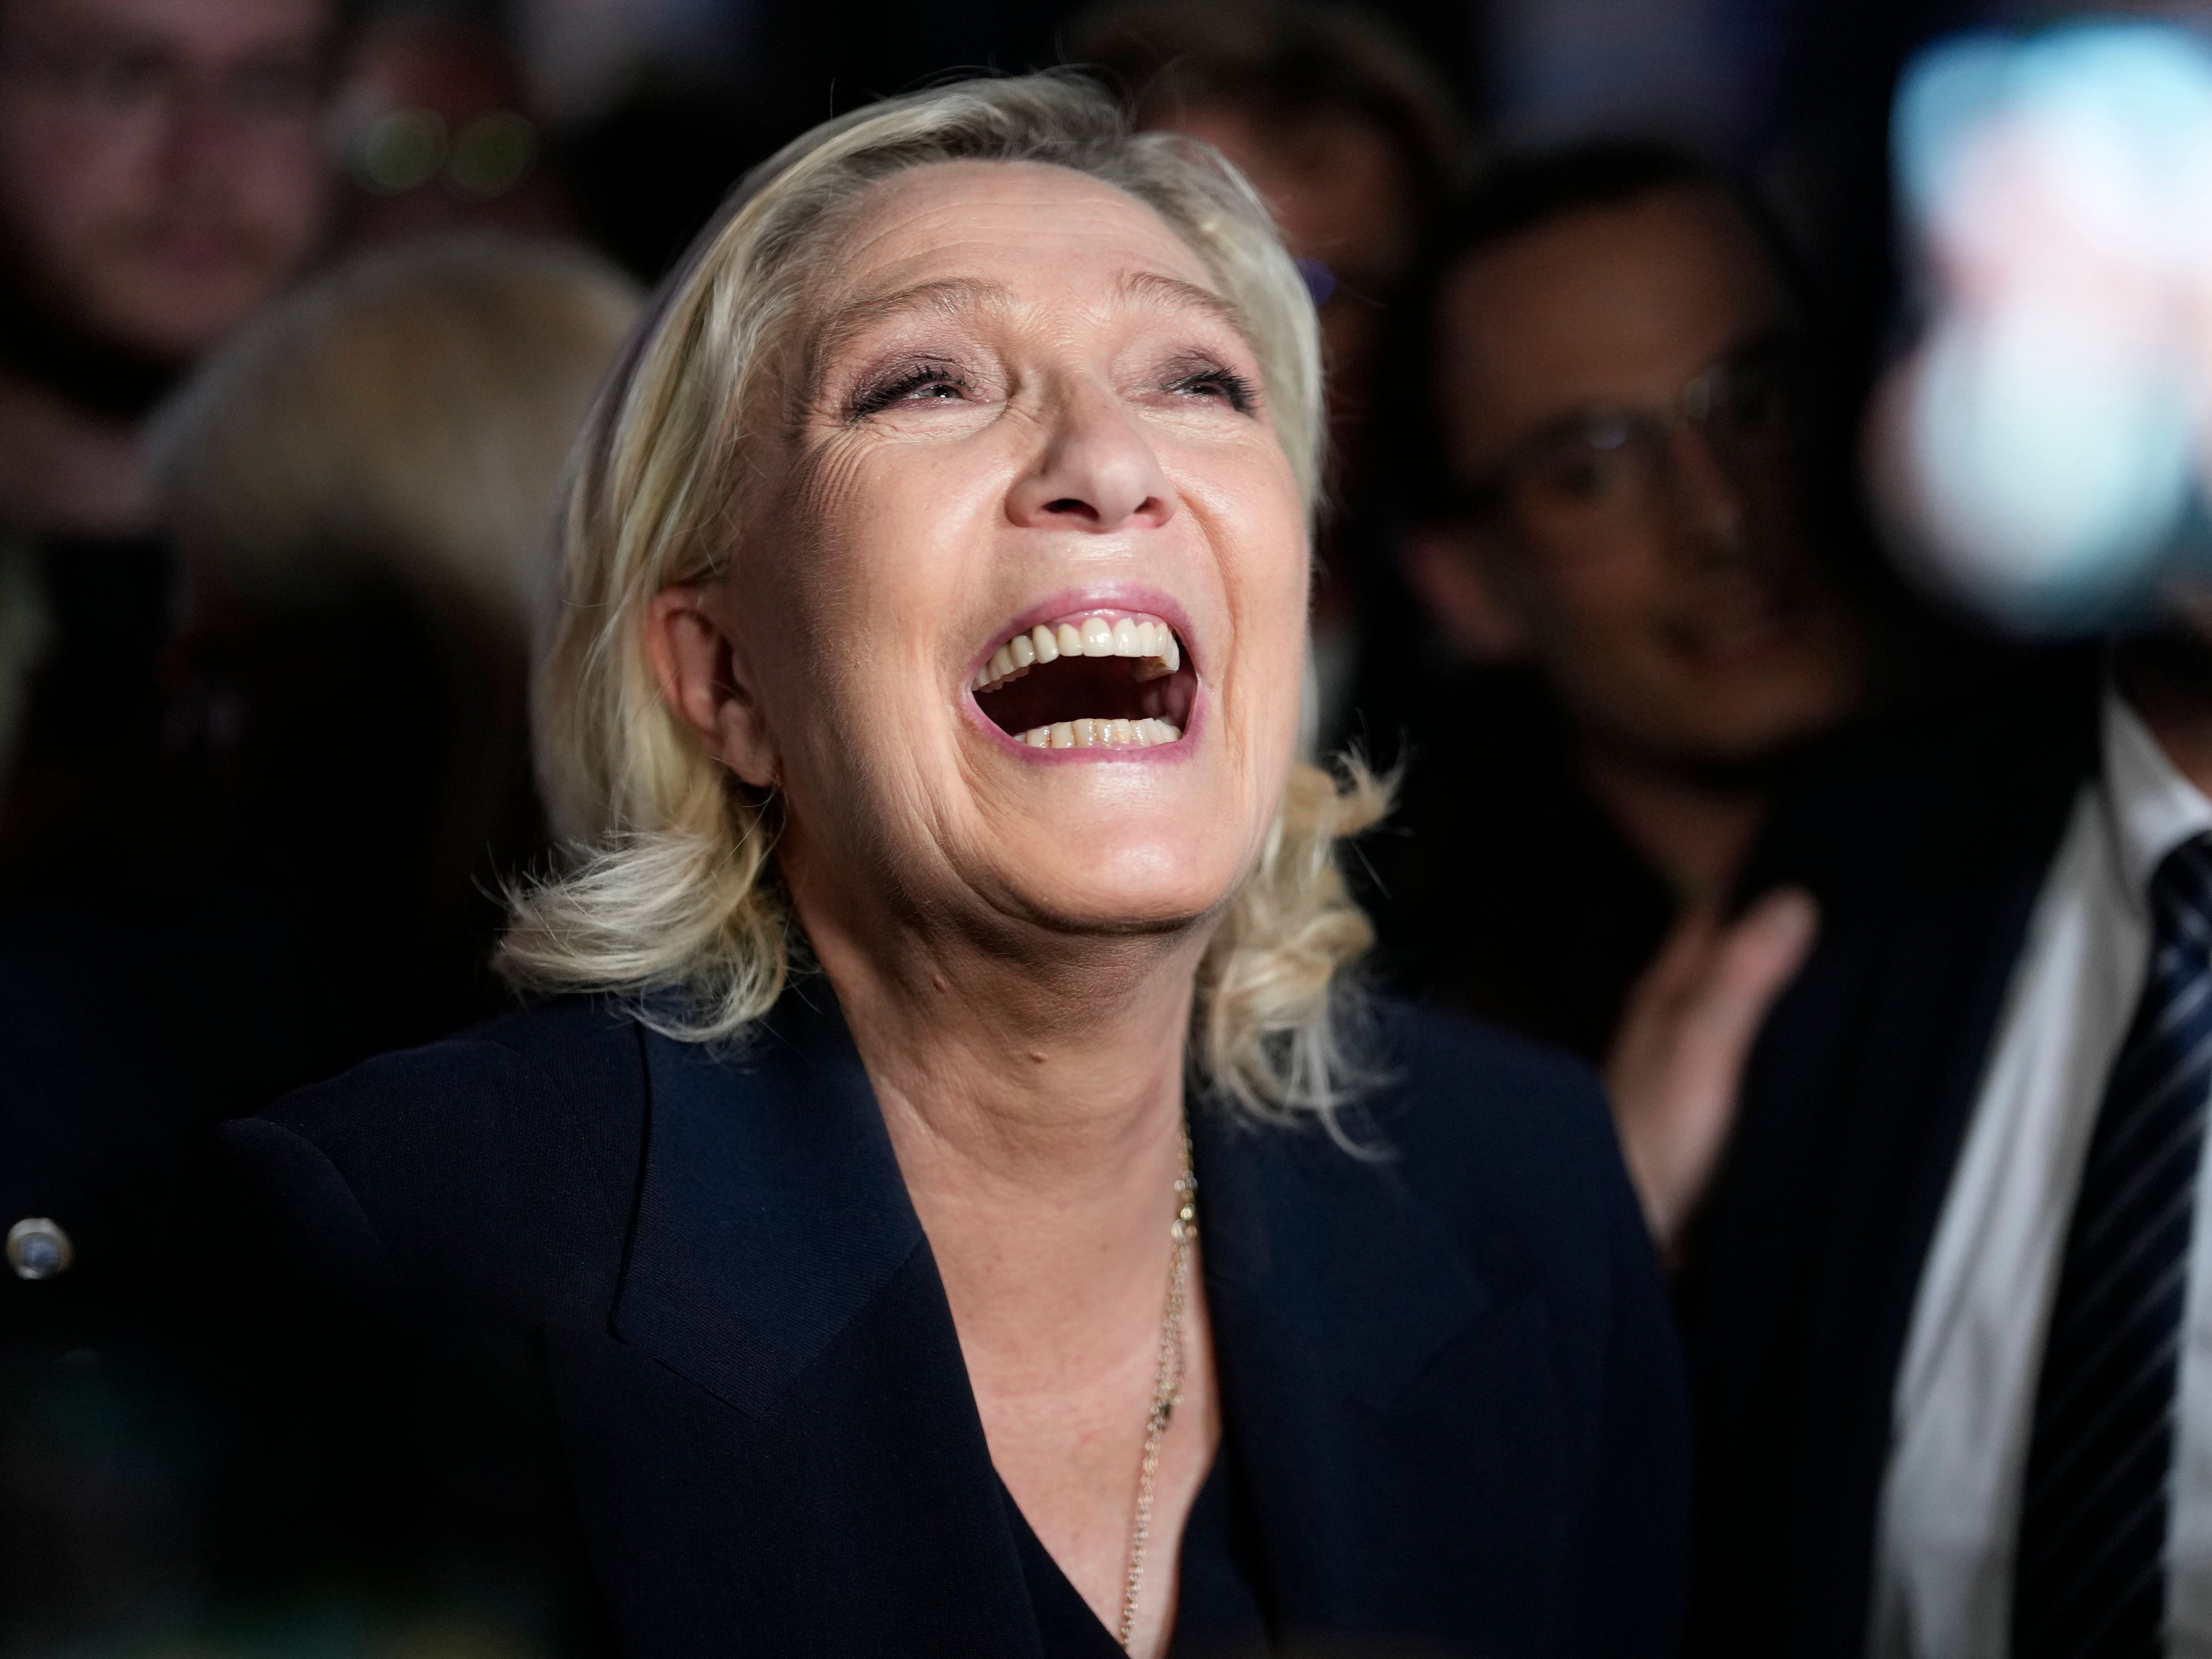 Le Pen says France is in a ‘quagmire’ following chaotic elections